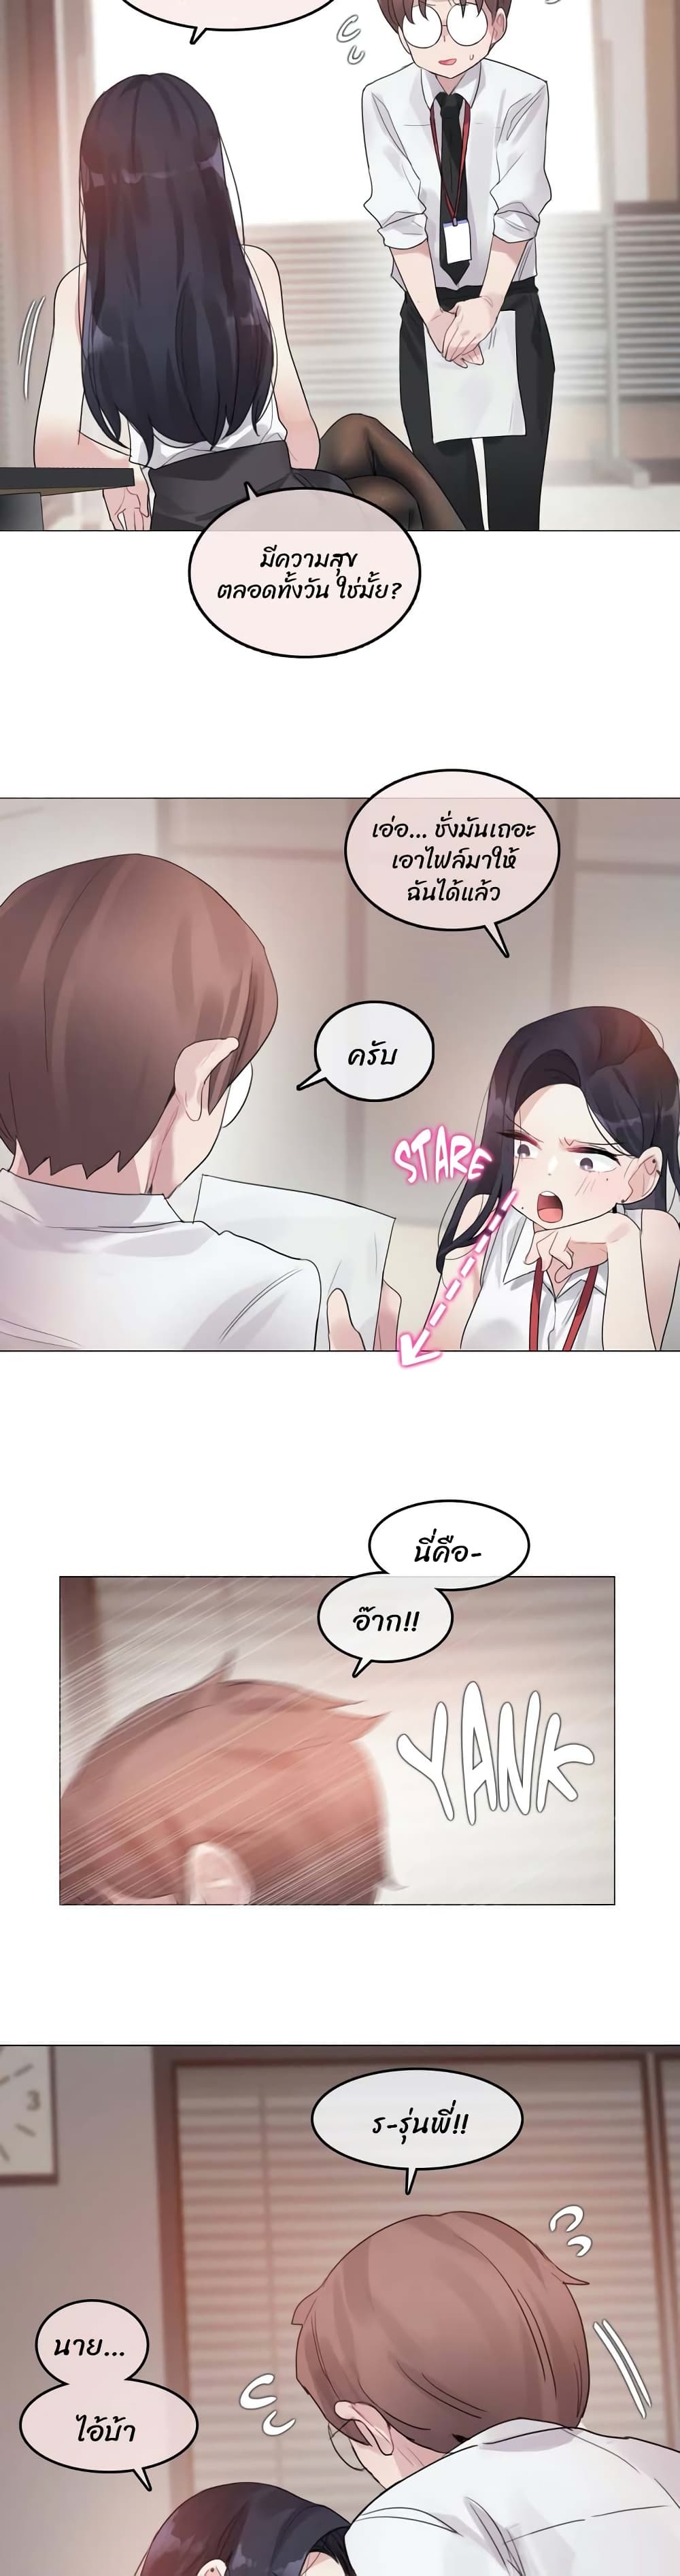 A Pervert's Daily Life 96 (9)